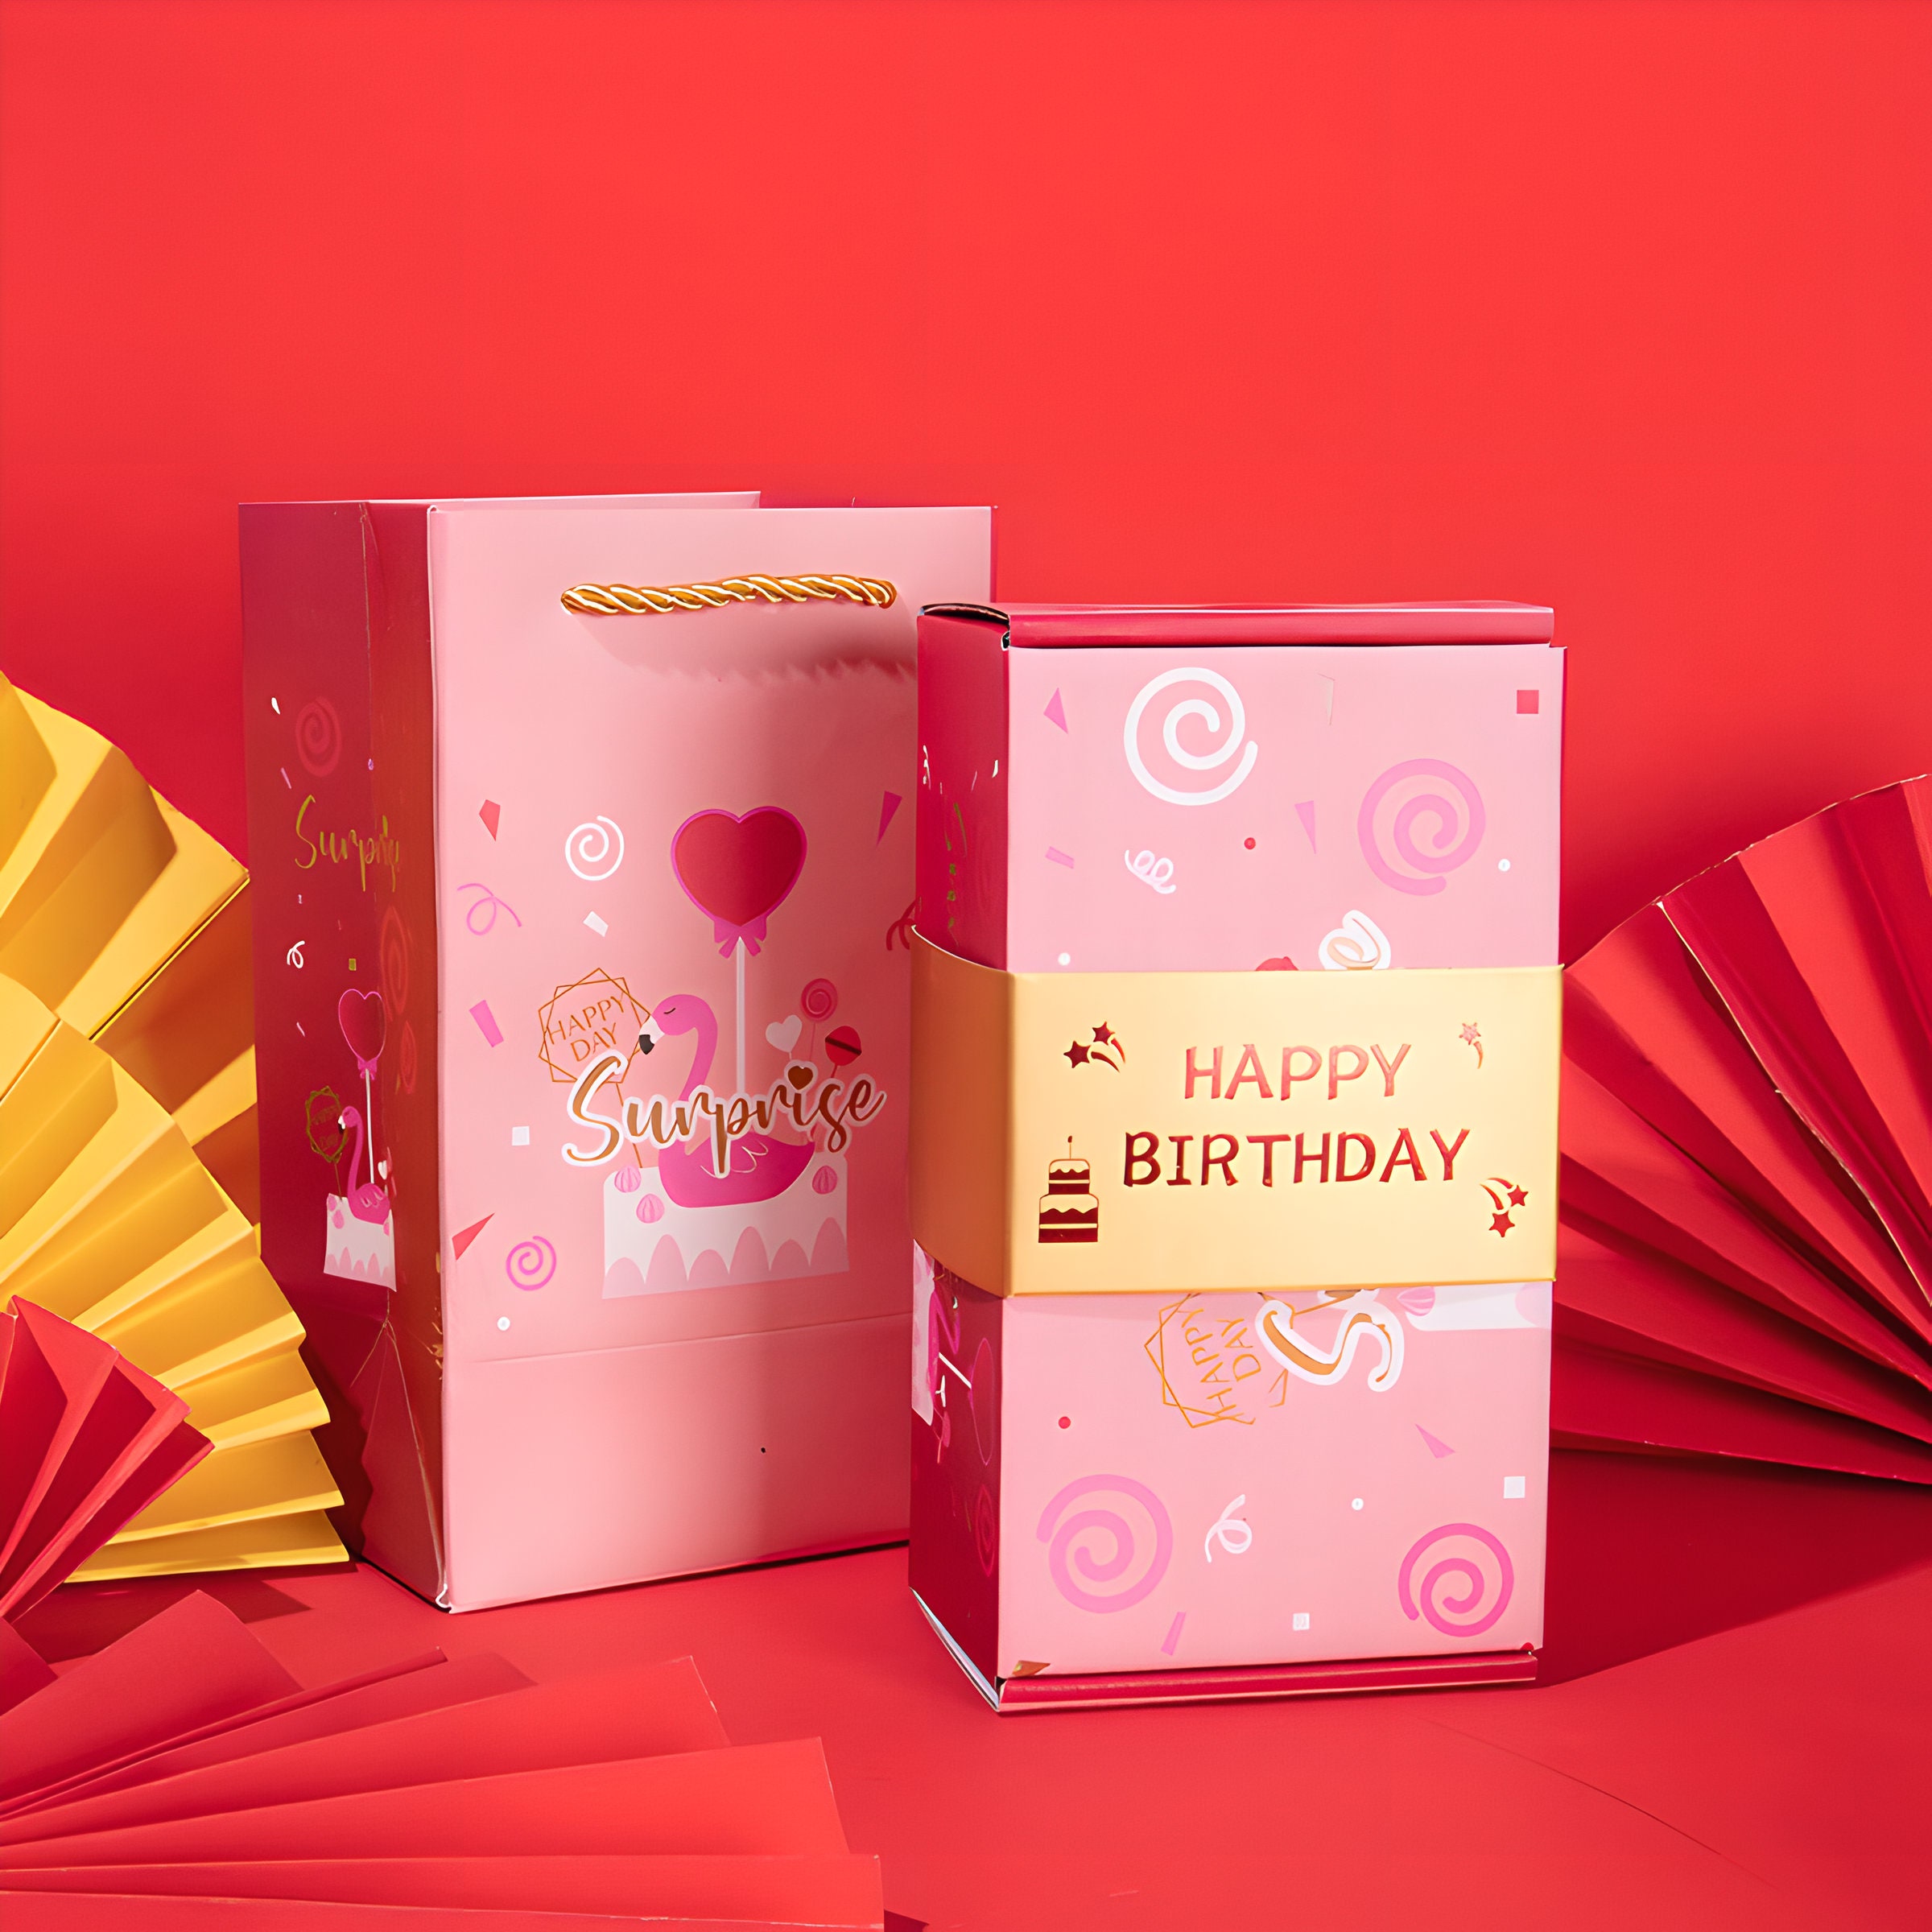 Money Gift Boxes For Cash Birthday, Explosion Gift Box Creating The Most  Surprising Gift, Small Gift Boxes For Birthday Anniversary Valentine Day